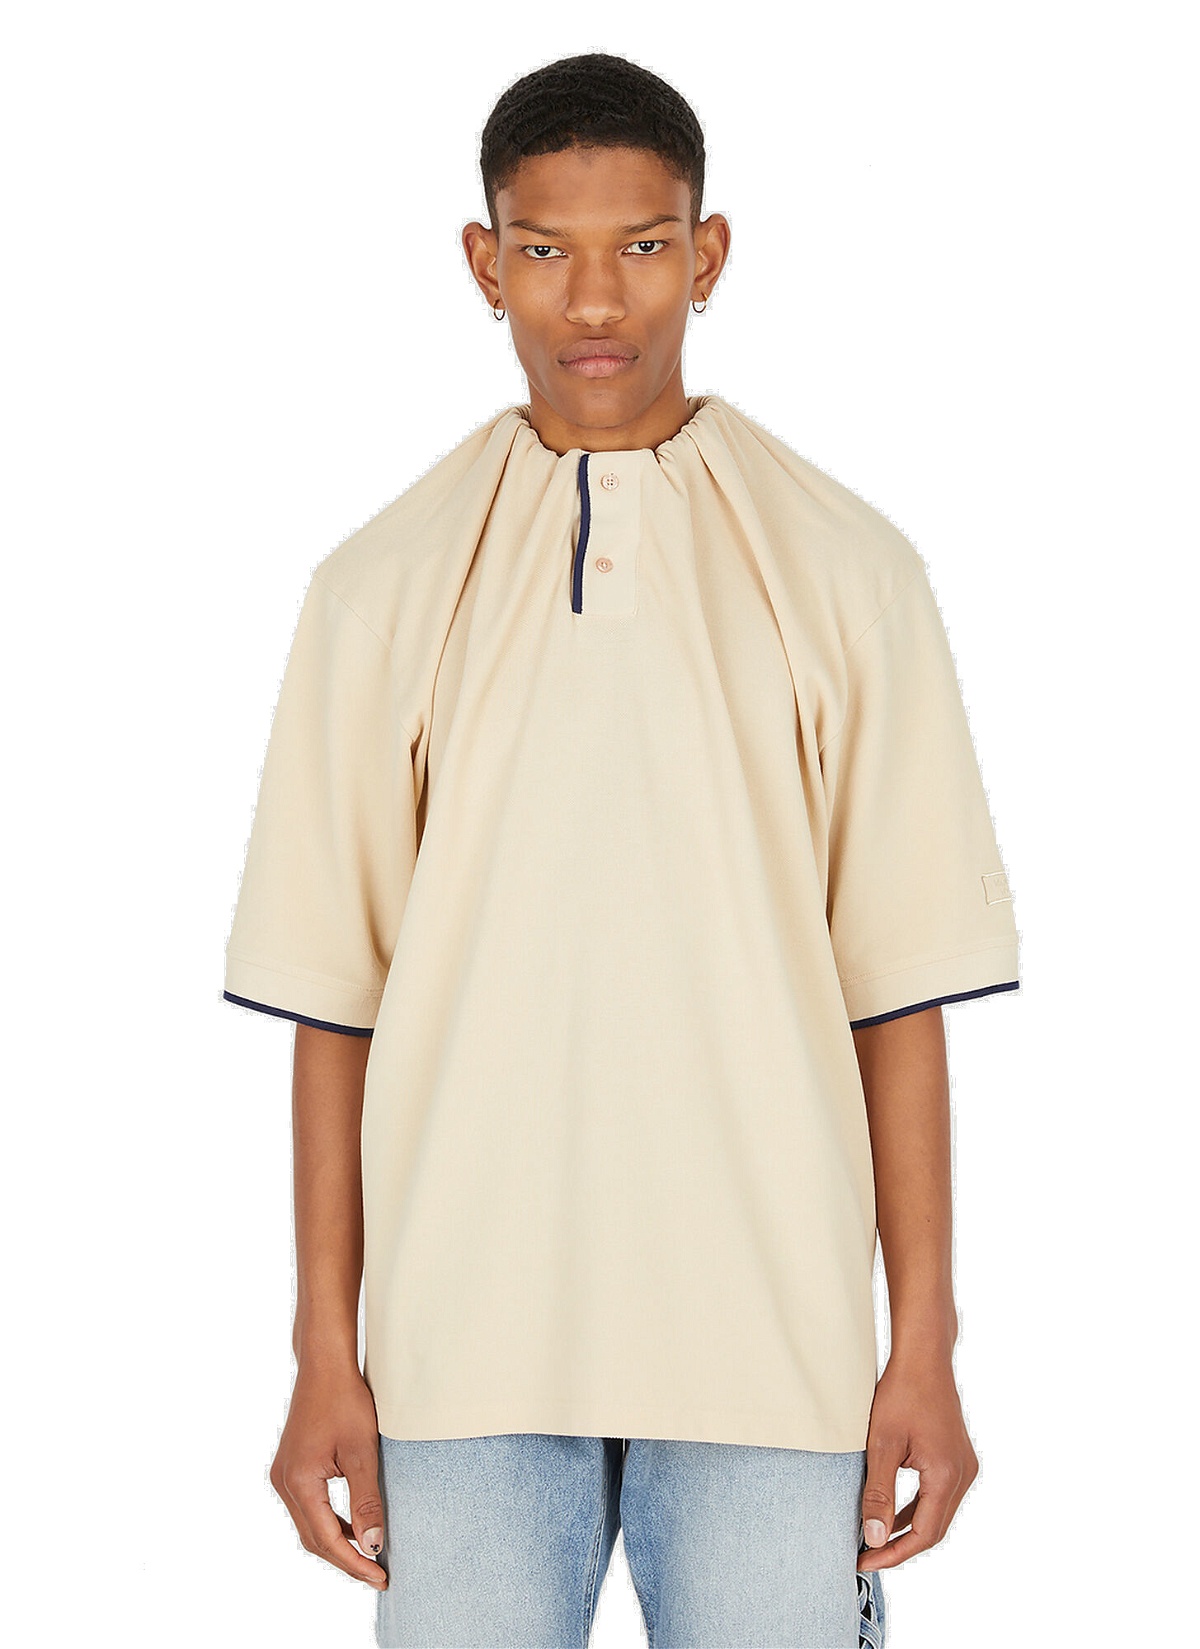 Photo: Tucked Neck Polo Top in Beige